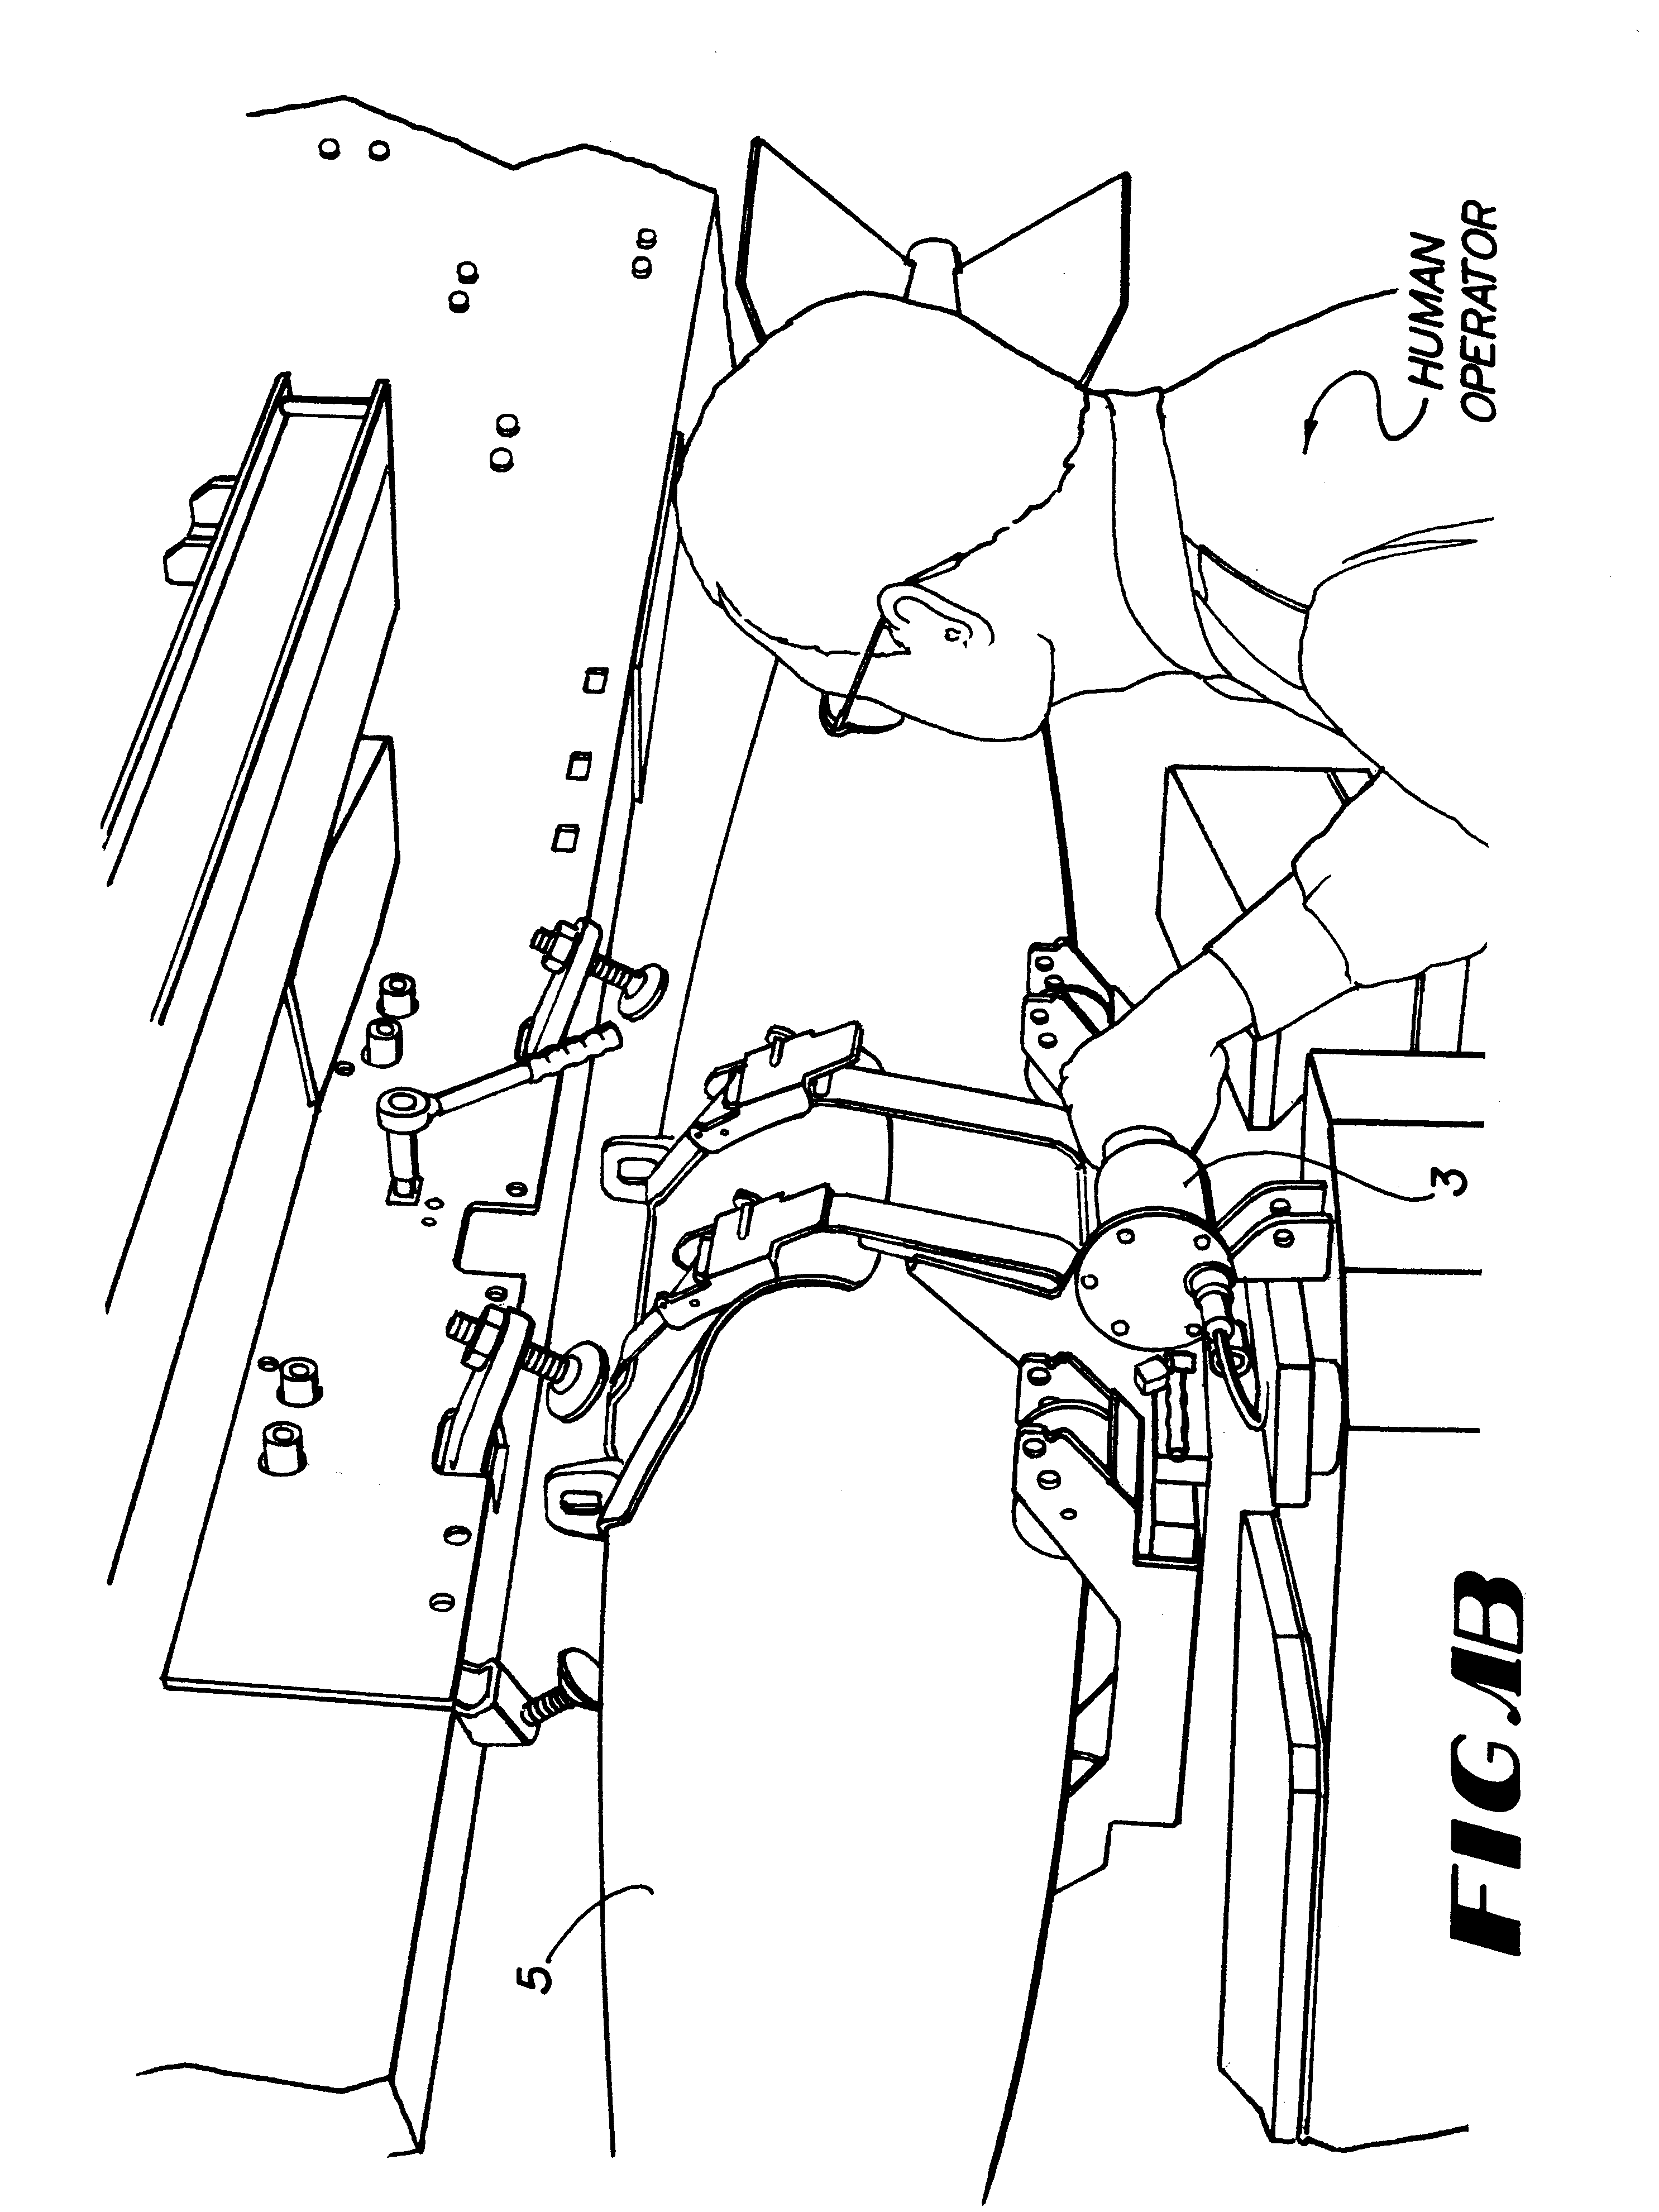 Apparatus and methods for a human extender